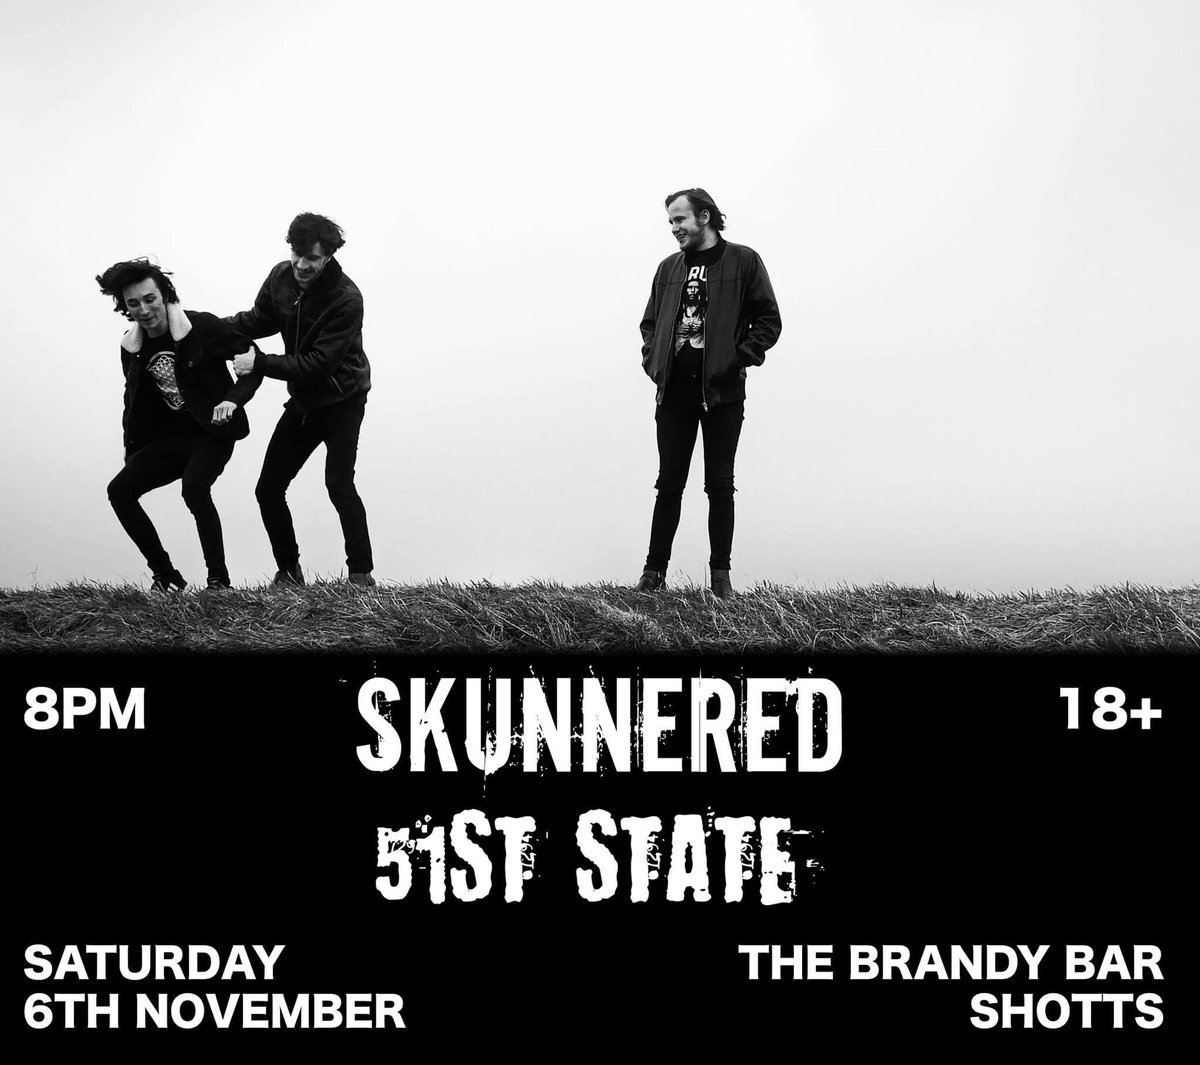 Our first gig back since lockdown will be in The Brandy Bar joined by 51st State. Kicks off at 8PM on Saturday 6th of November. Hope to see yous all there.